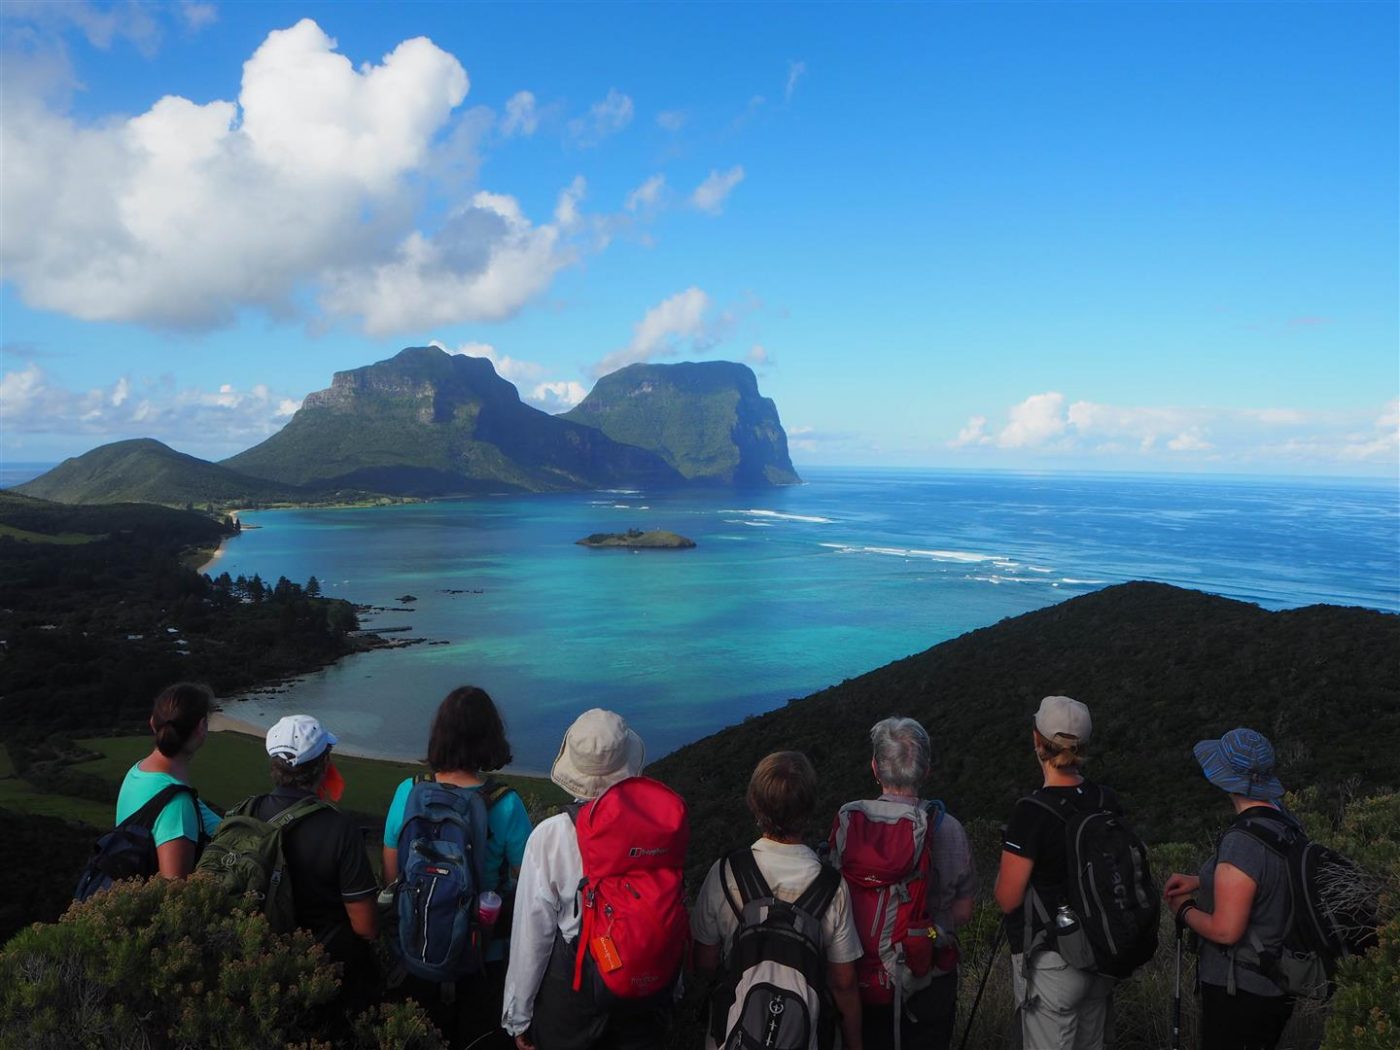 View from Malabar Hill Lord Howe Island